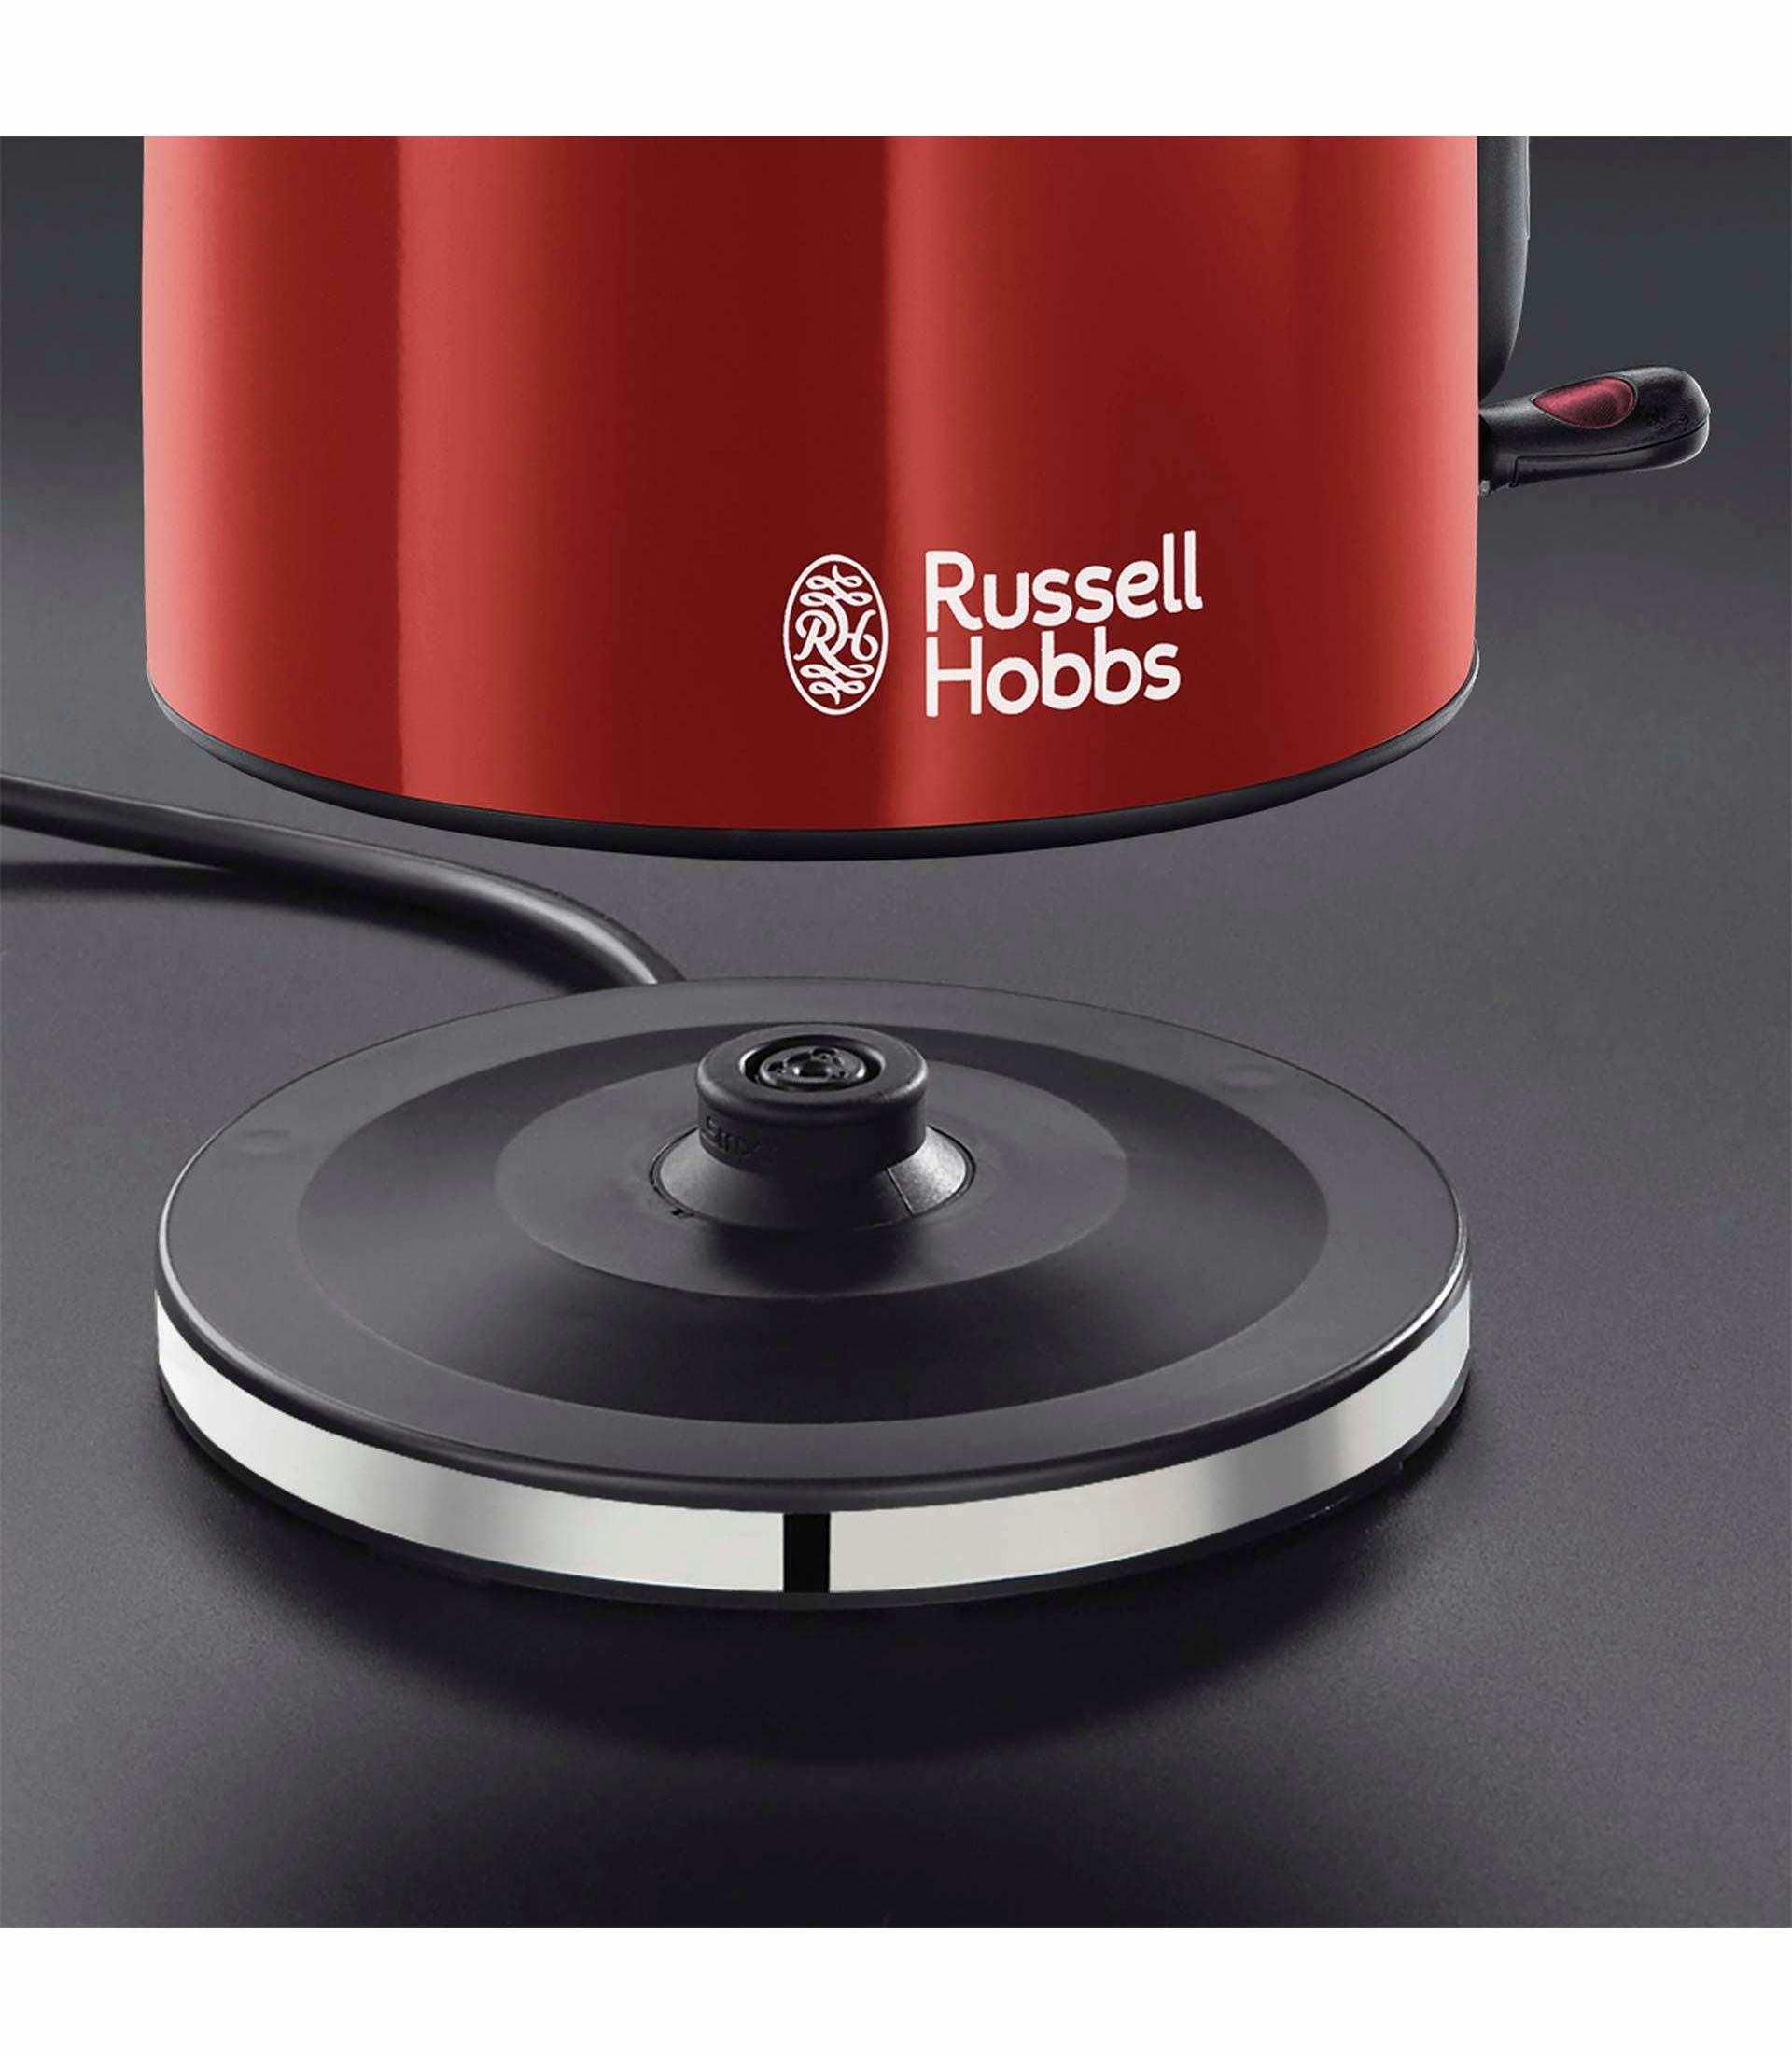 RUSSELL HOBBS Wasserkocher »20412-70 WK Colours Plus+ Flame Red«, 1,7 l, 2400 W